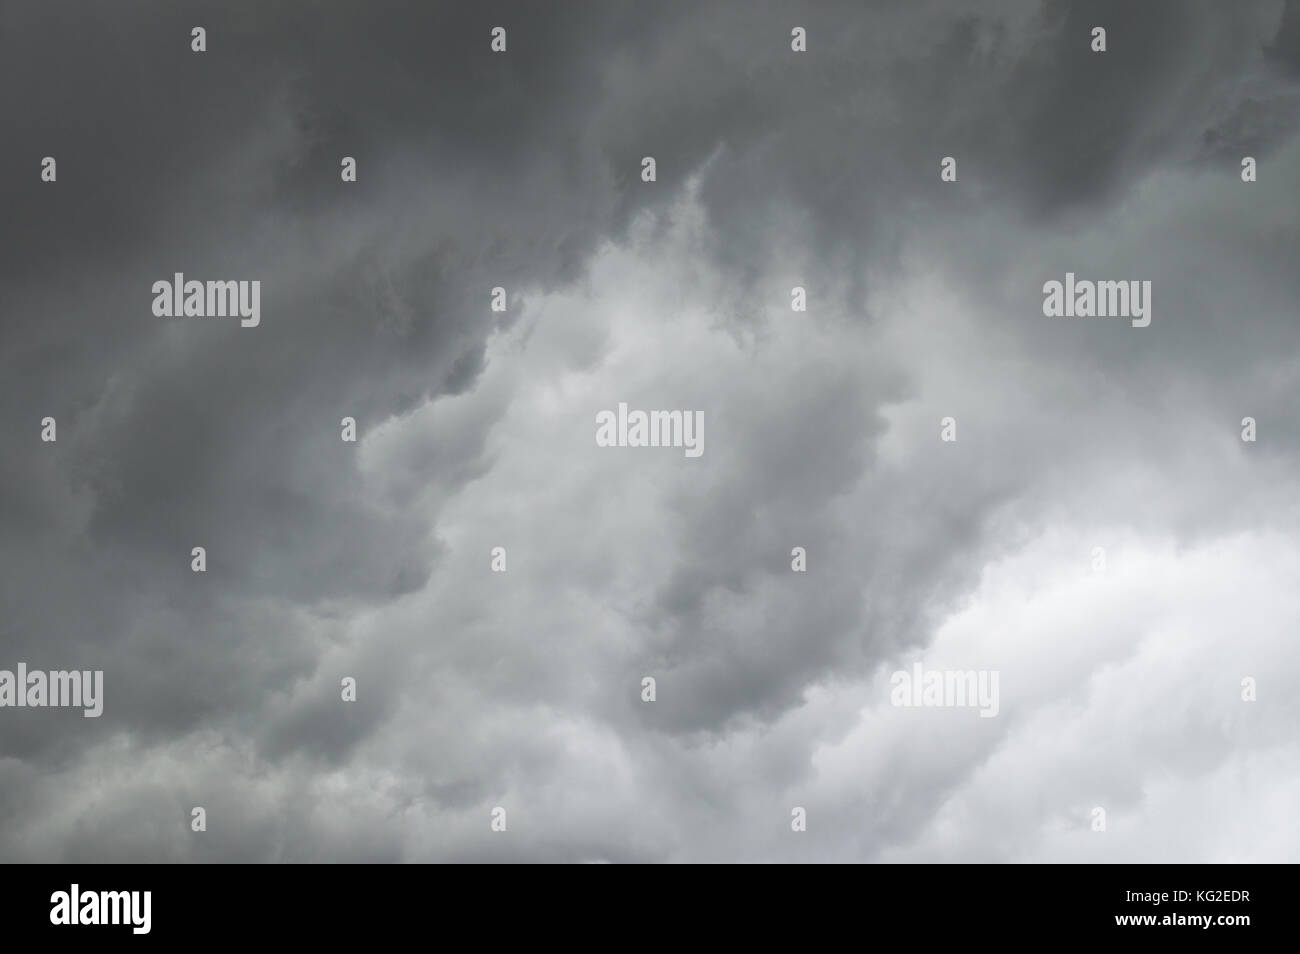 Intentionally High Resolution Stock Photography and Images - Alamy